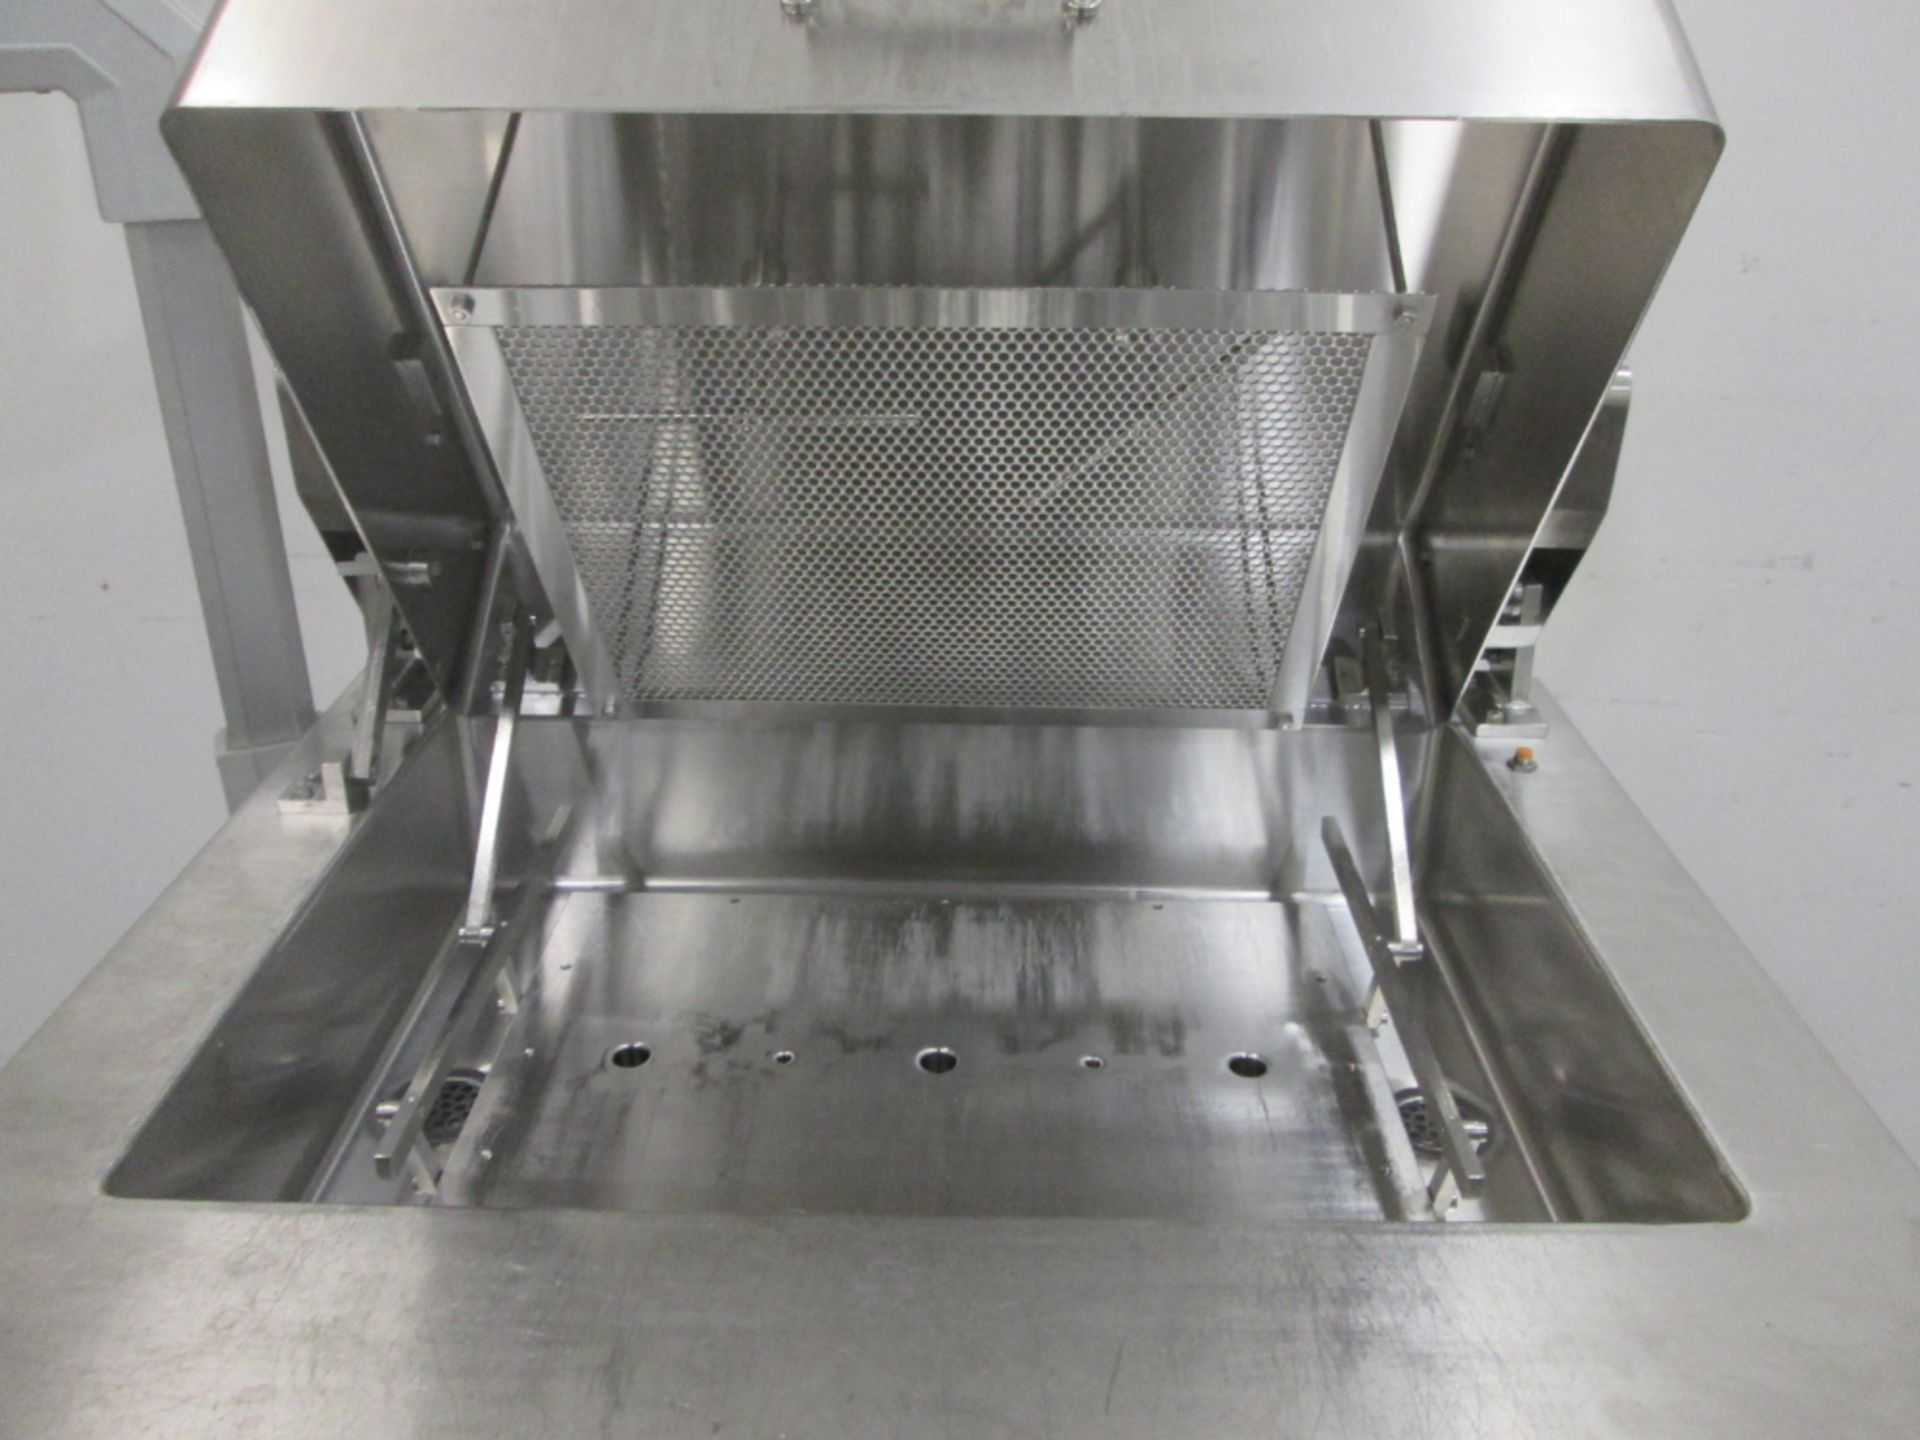 Cozzoli GW-24 Batch Vial Washer - Image 2 of 11